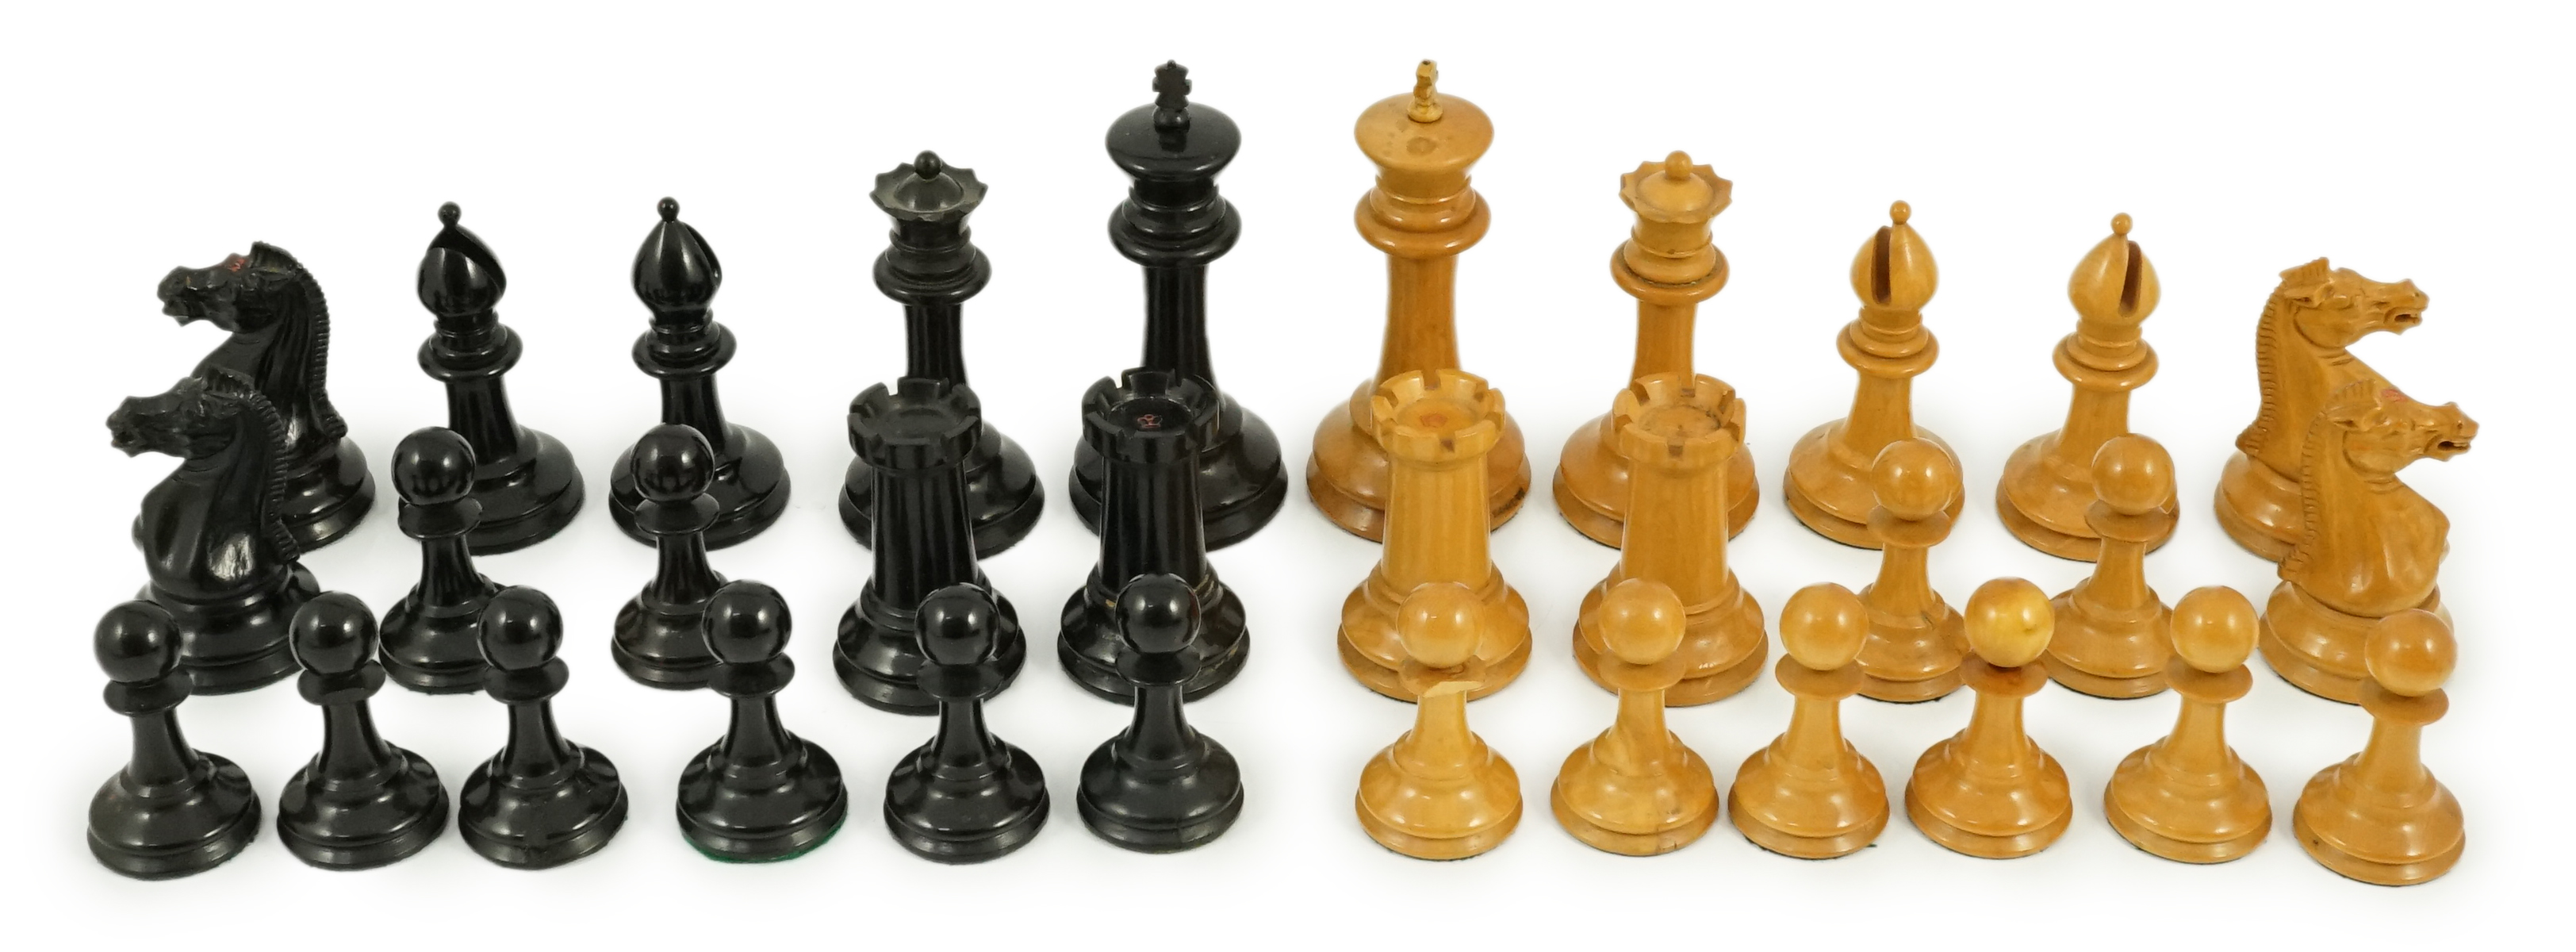 An early Jaques Staunton pattern lead weighted boxwood and ebony chess set, c.1850, Kings 10cm (4in.)